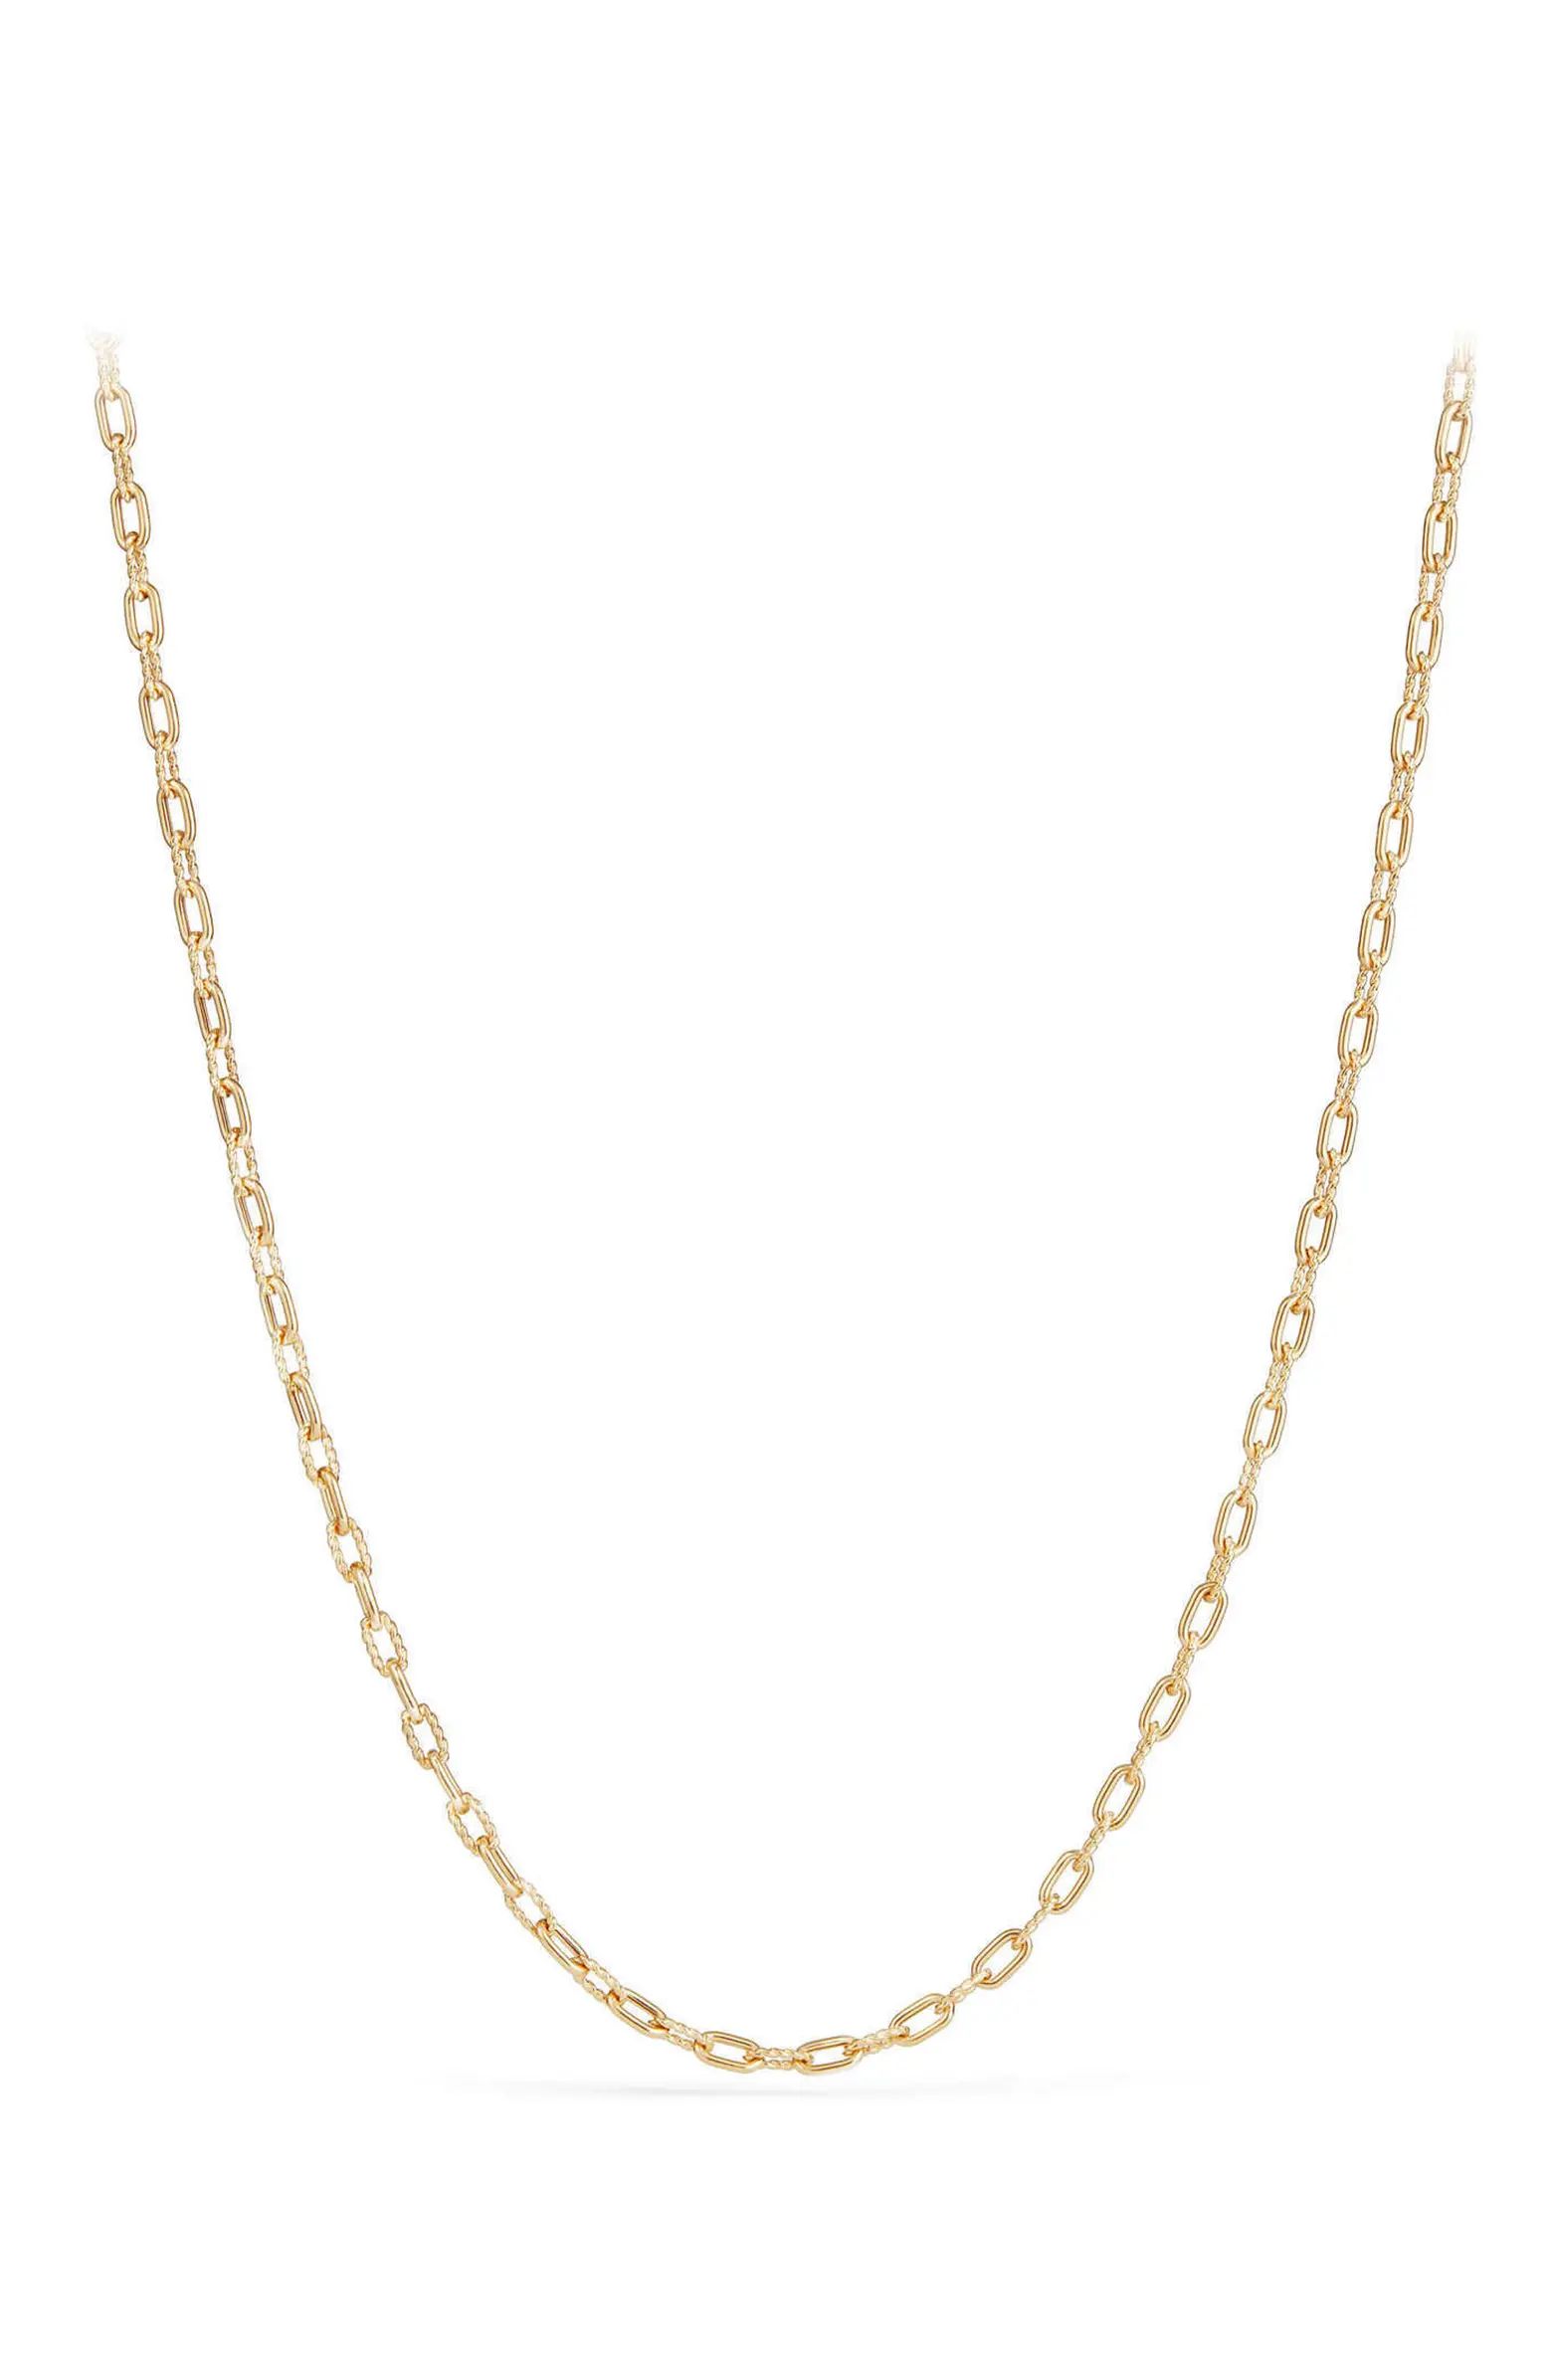 DY Madison Thin Chain Necklace in 18K Gold | Nordstrom